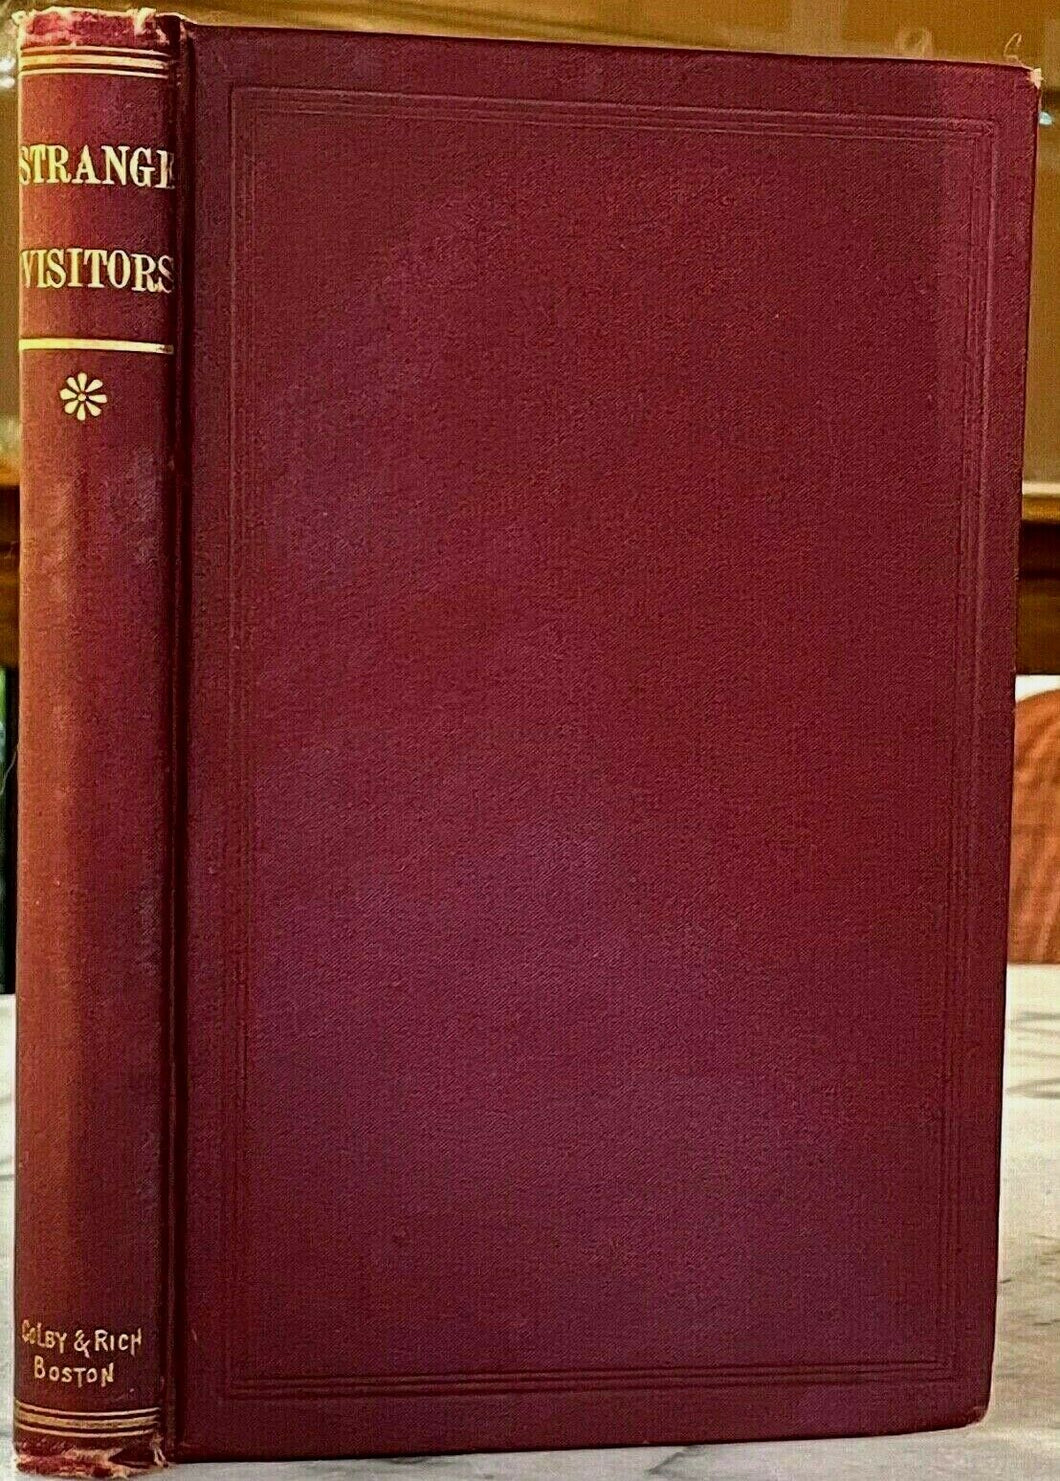 STRANGE VISITORS - 1884 PROPHECY APPARITIONS GHOSTS MESSAGES BYRON, BRONTE, POE